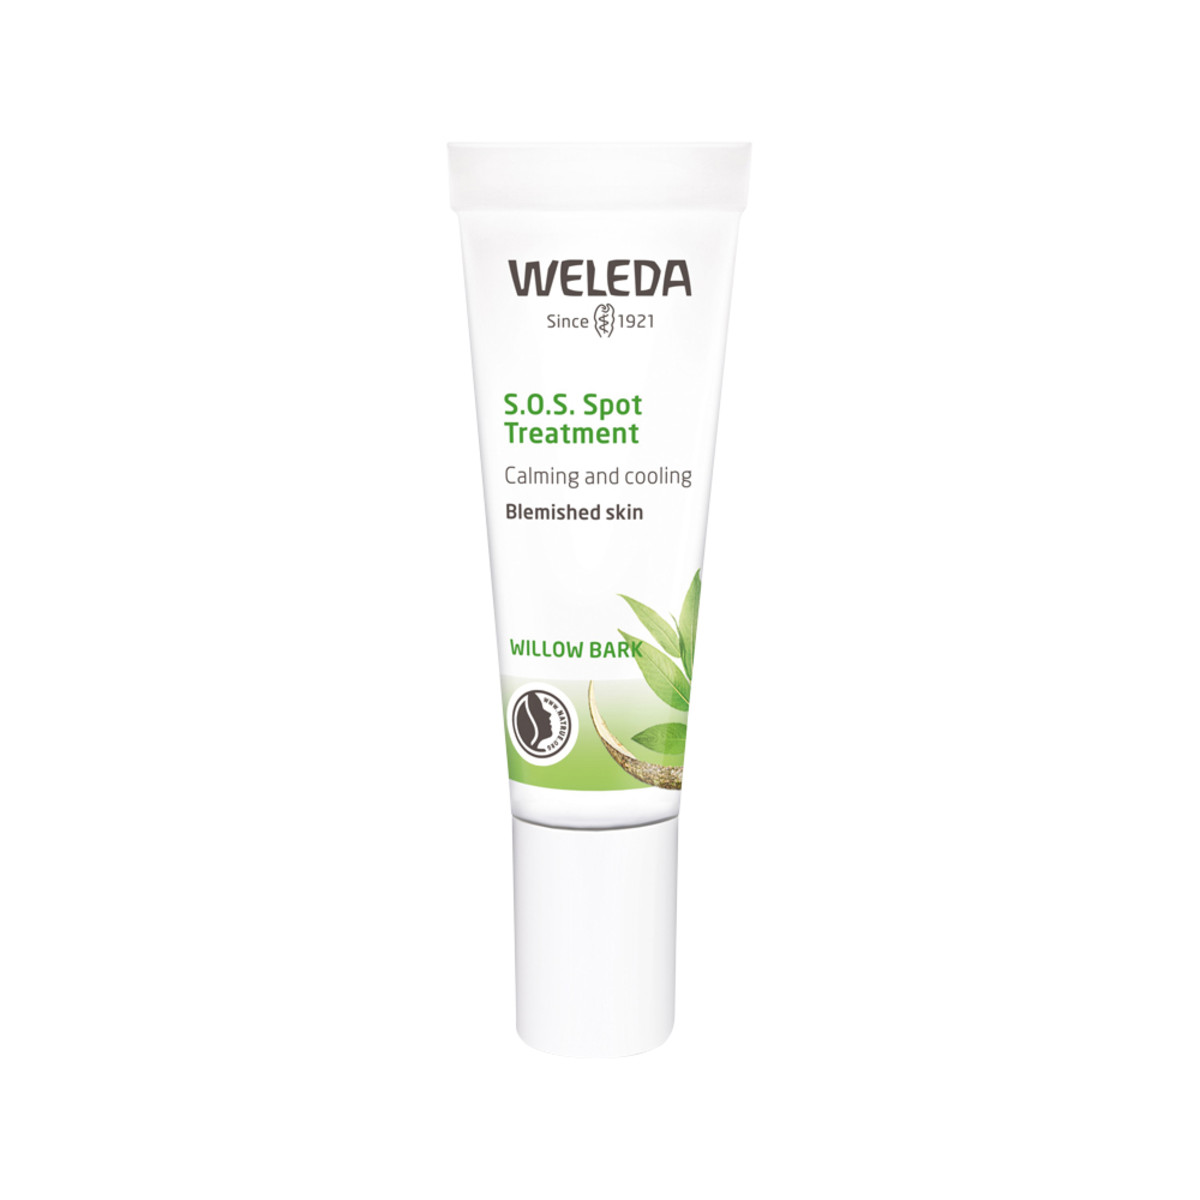 WELEDA - S.O.S. Spot Treatment Willow Bark (Calming and Cooling - Blemished Skin)